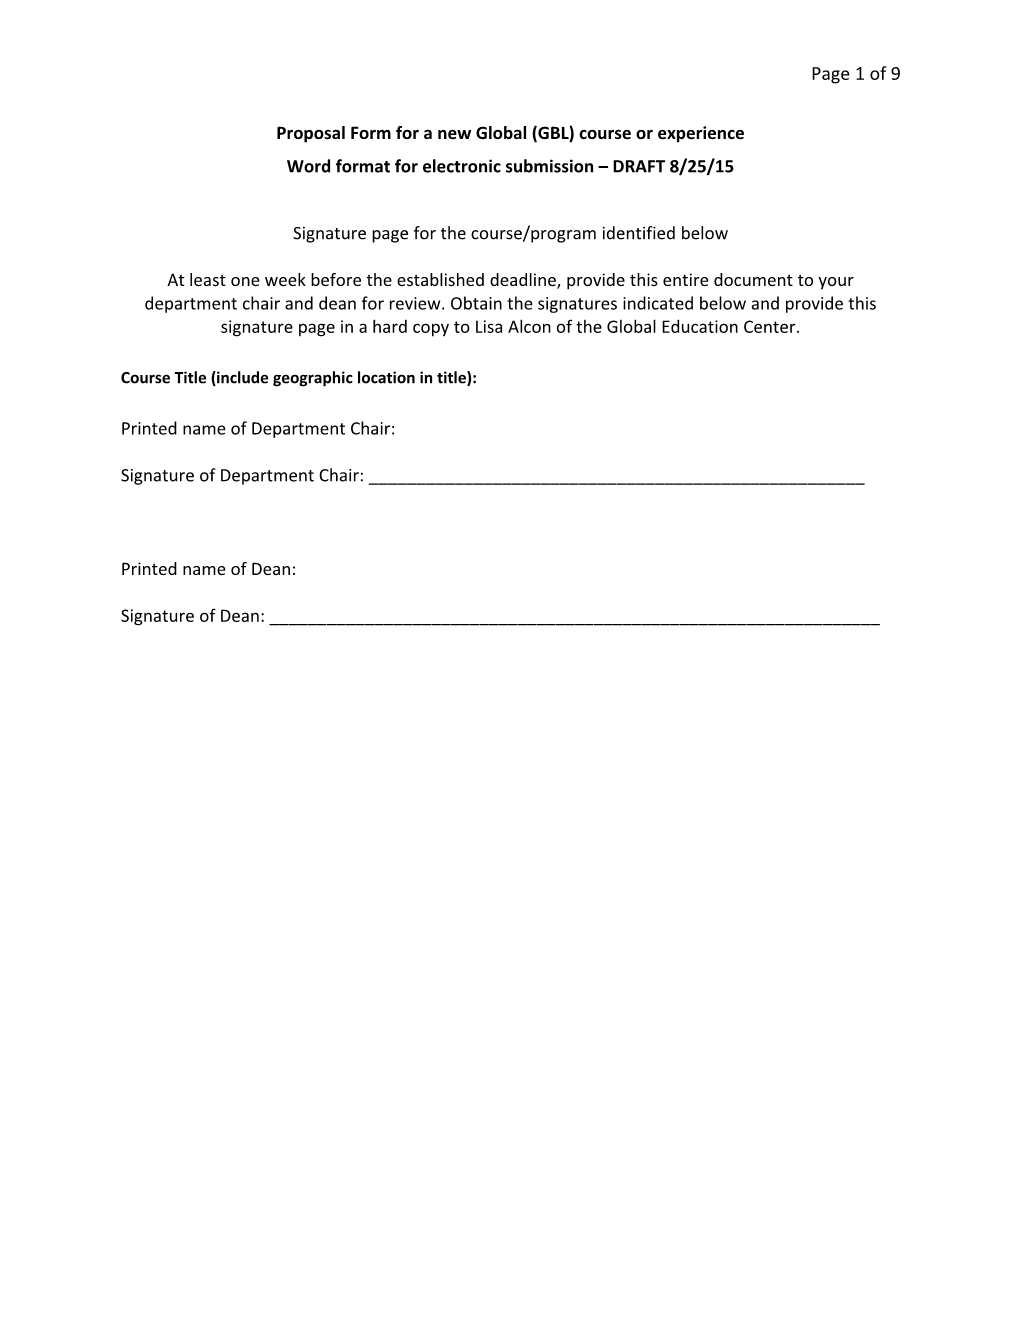 Proposal Form for a New Global (GBL) Course Or Experience